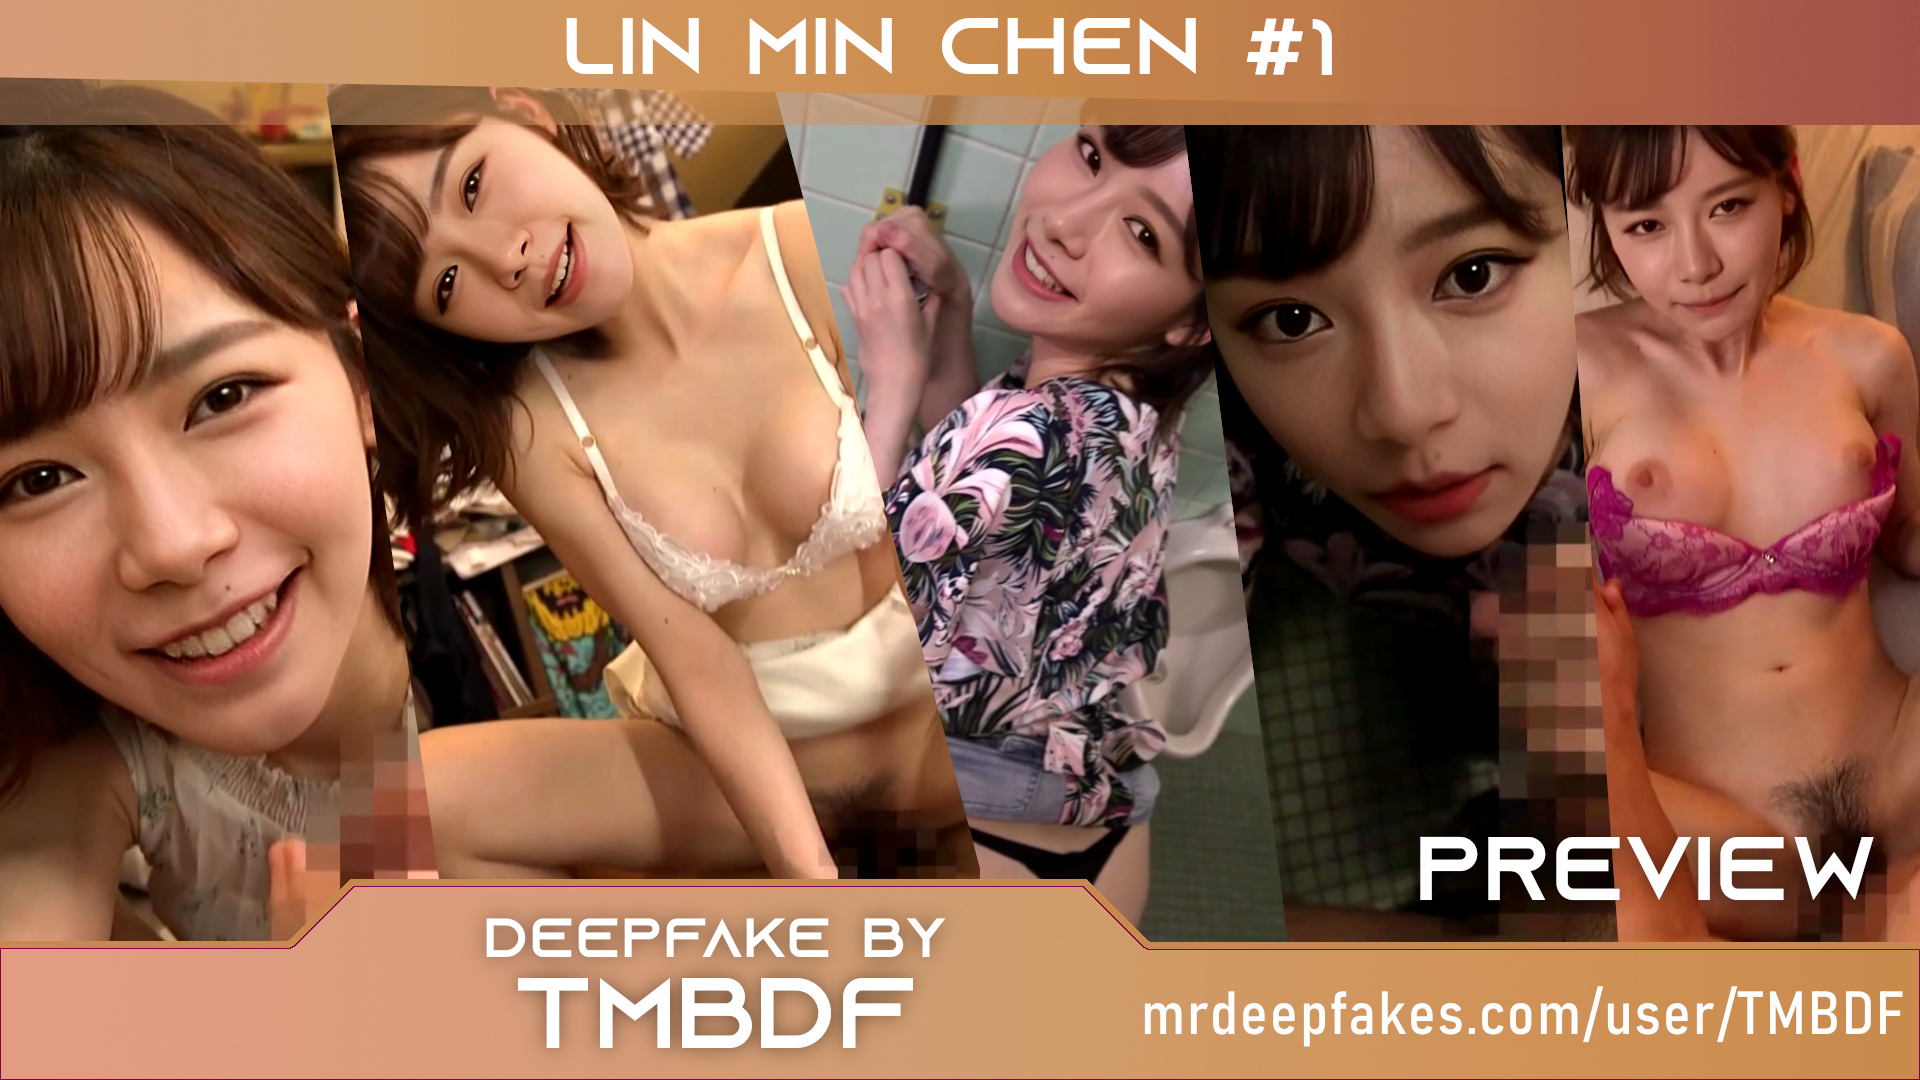 Not Lin Min Chen invities you for a whole day of fucking (preview - 47:40)  #1 DeepFake Porn - MrDeepFakes